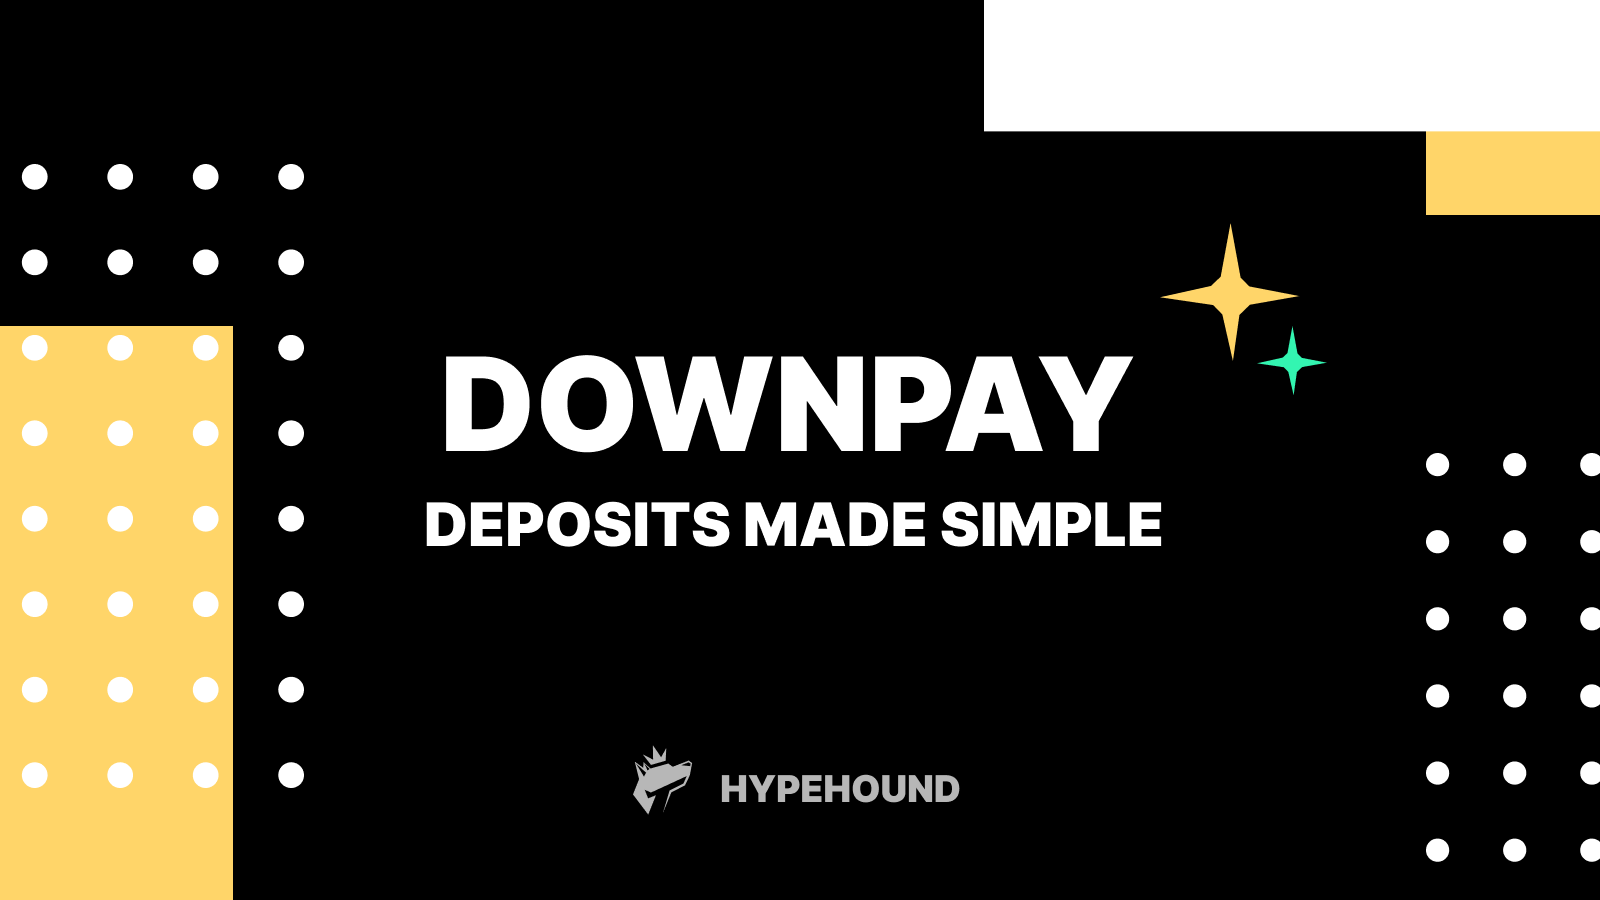 Load video: Downpay video introducing the best deposit app for Shopify merchants